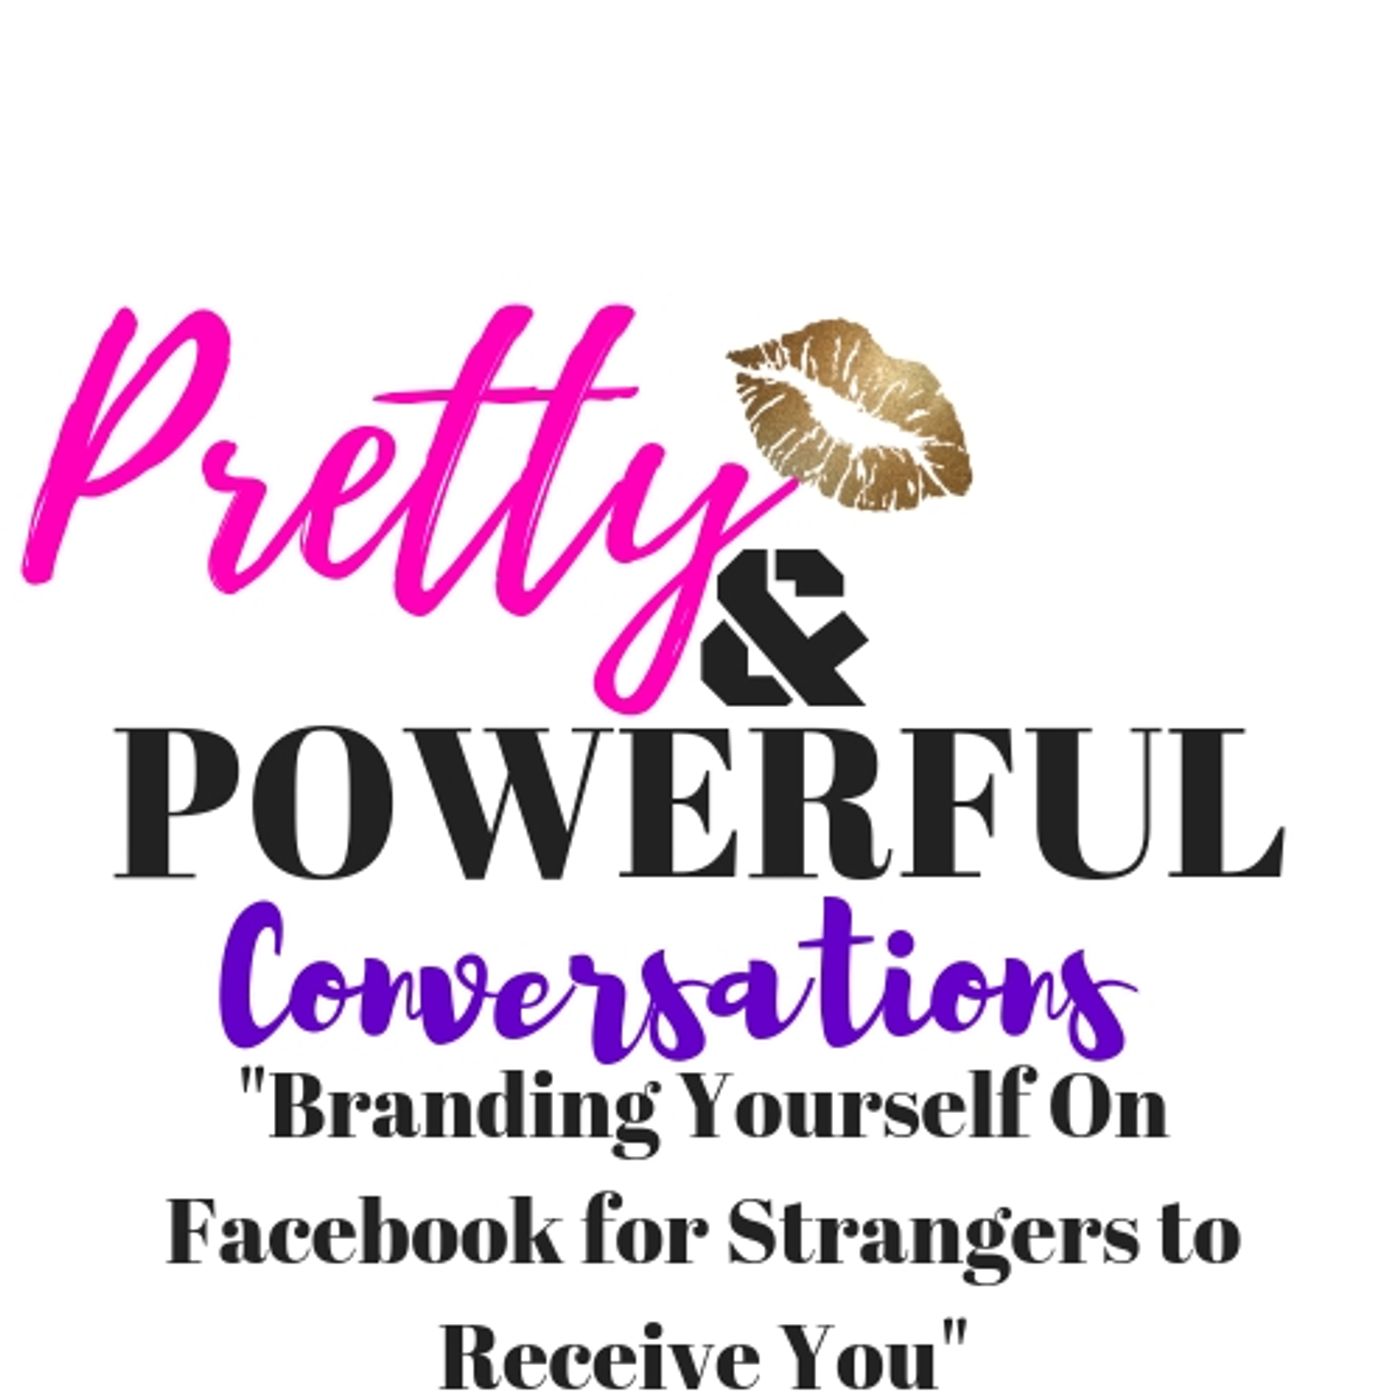 Branding Yourself On Facebook for Strangers to Receive You